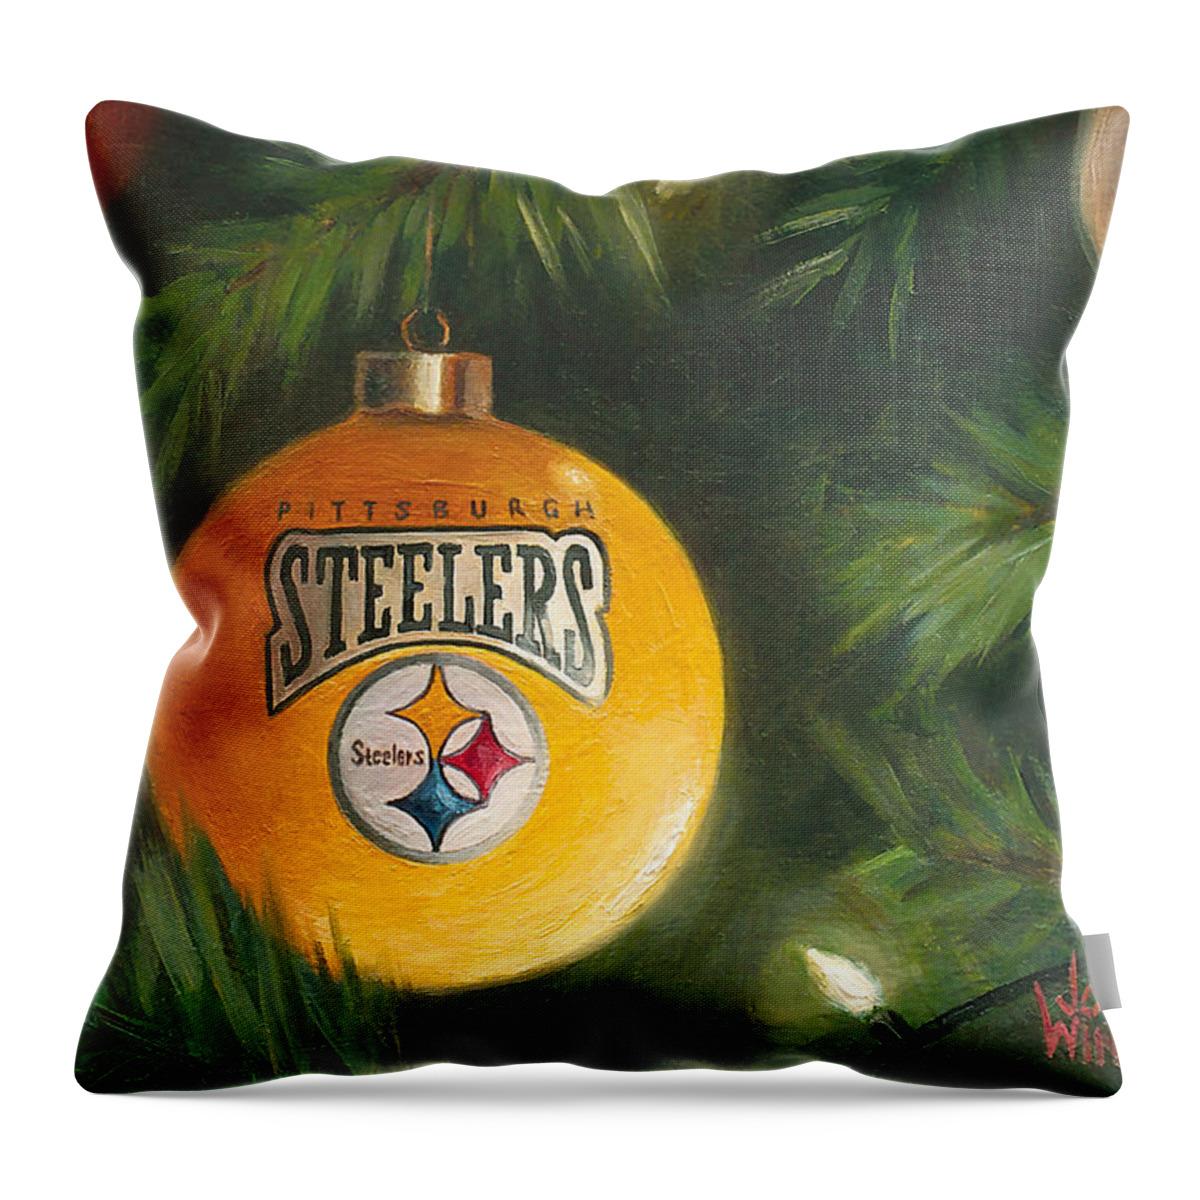  Throw Pillow featuring the painting Steelers Ornament by Joe Winkler